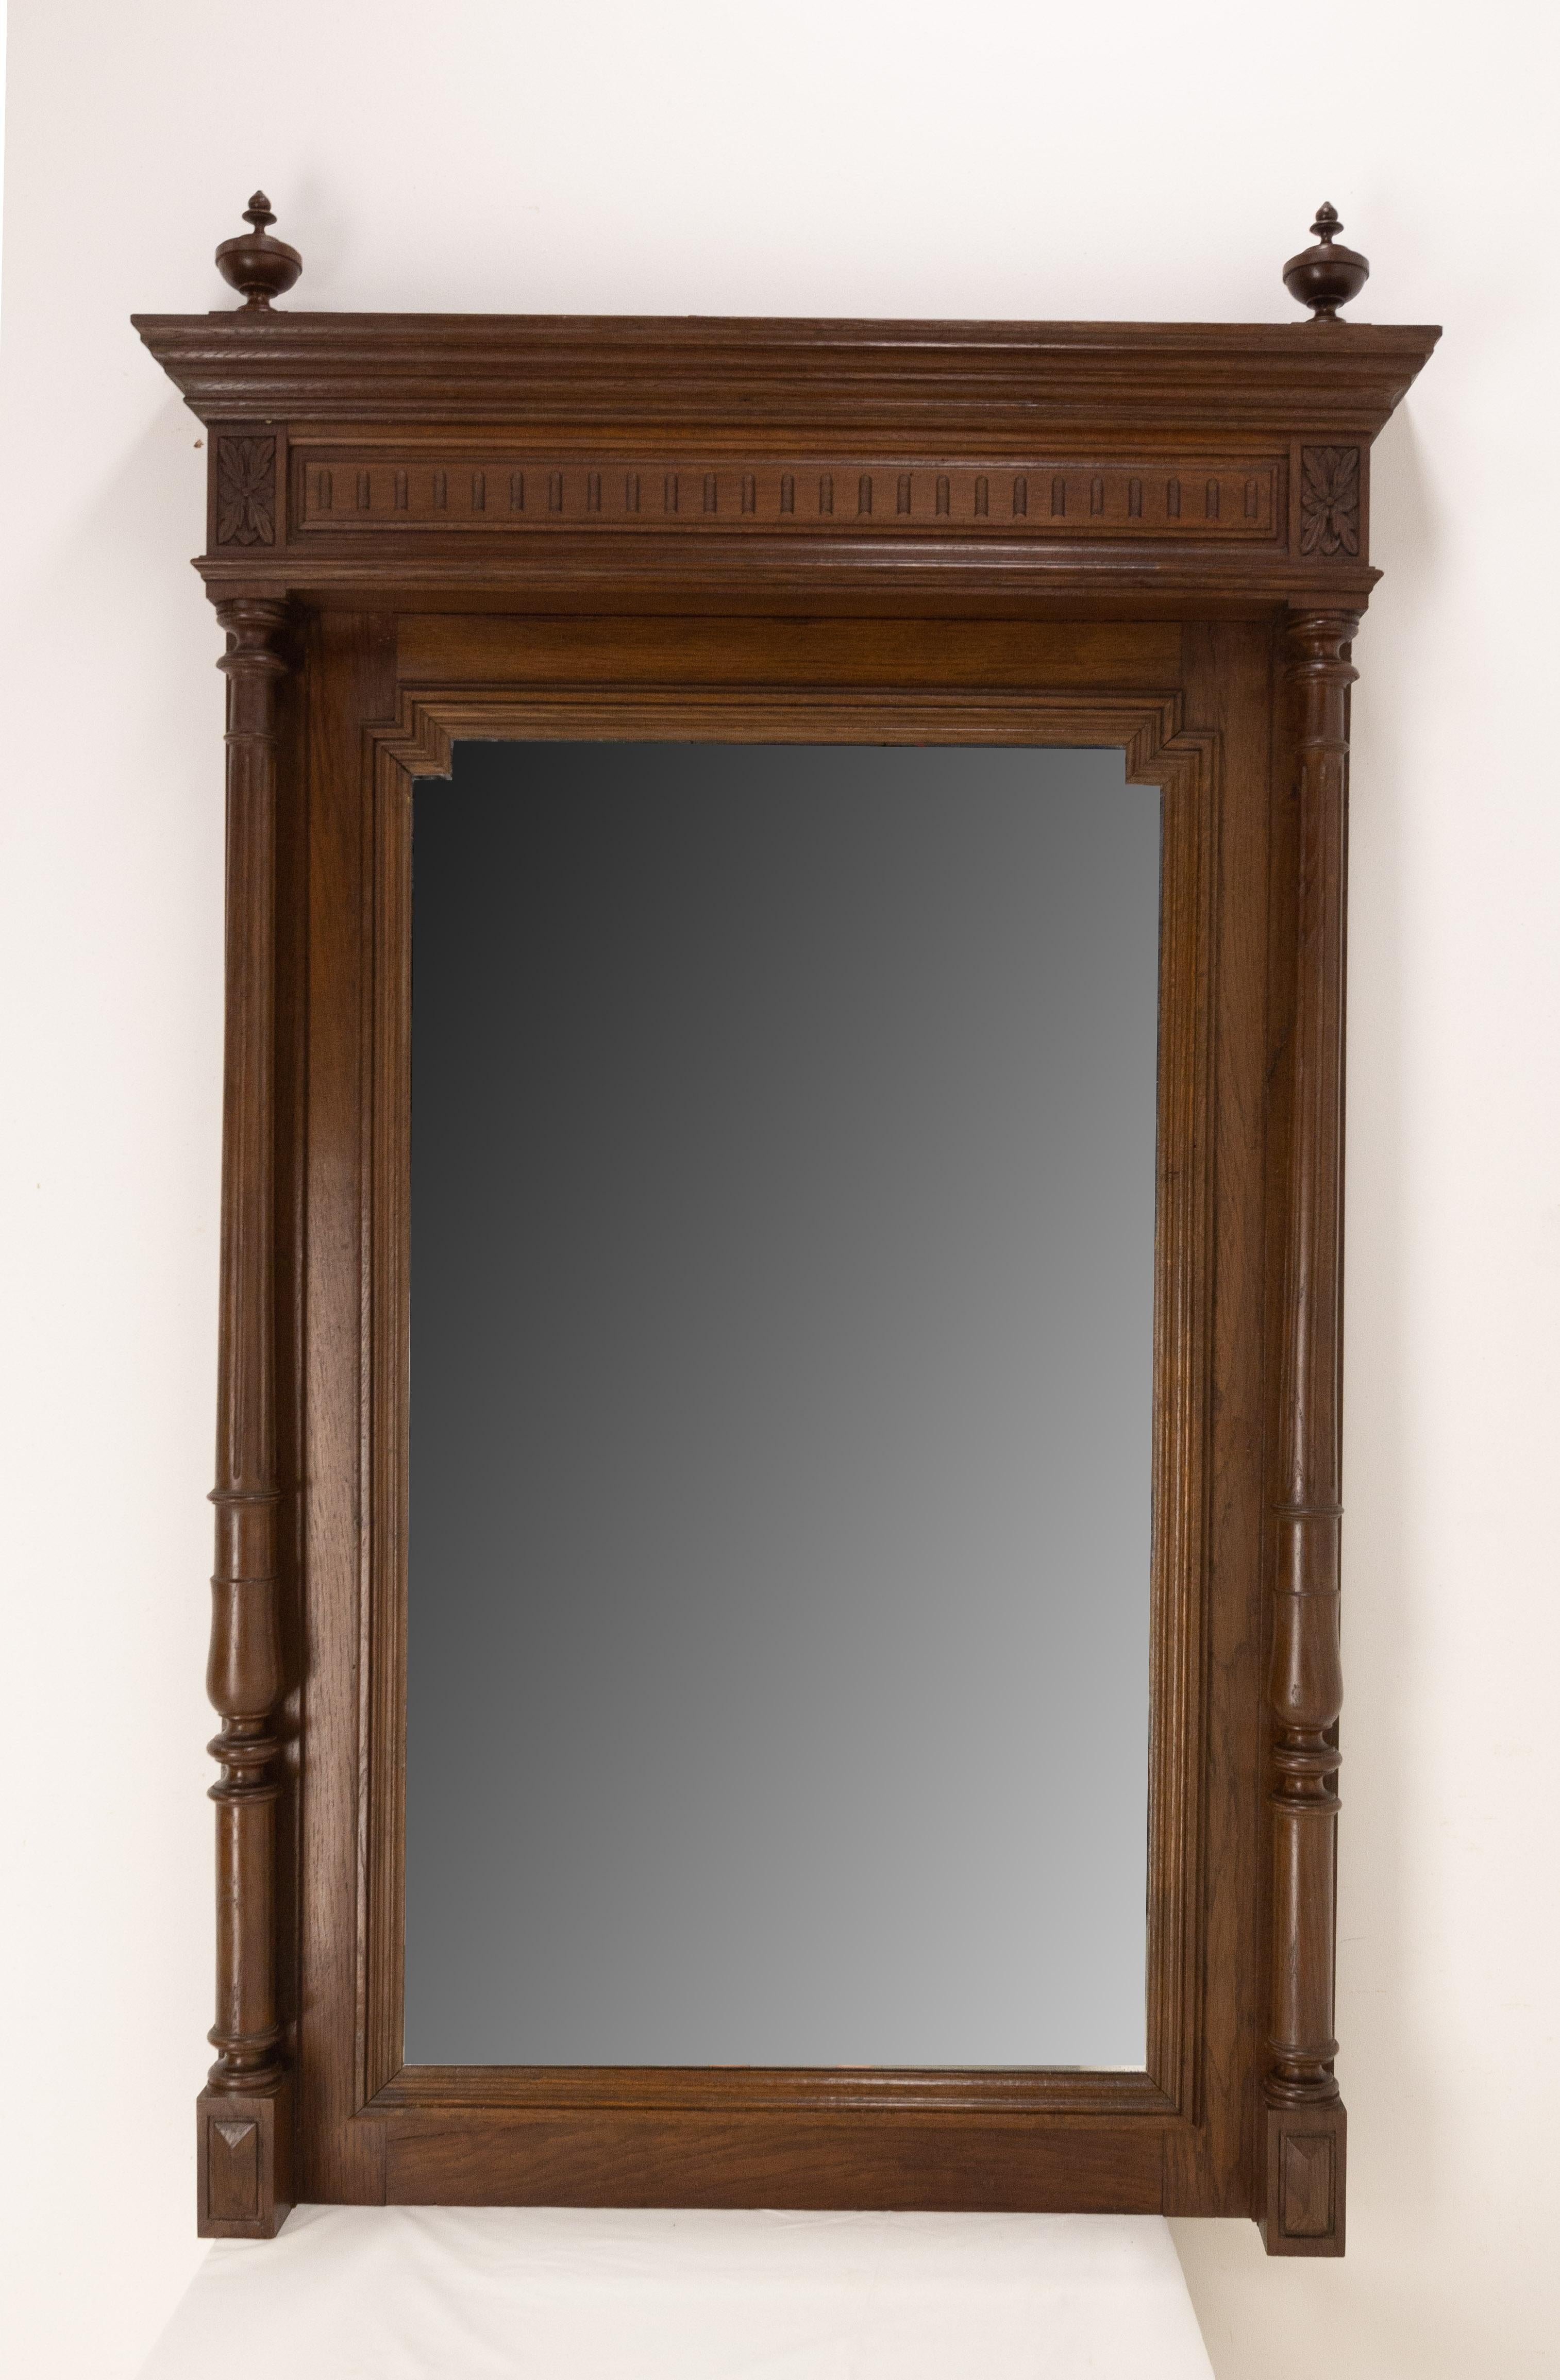 Late 19th century French Mirror with oak frame.
Little columns frame the mirror, Louis XVI style
Beveled mirror.
Good furniture for an entry or for a spacious room.
Good antique condition solid and sound with minor signs of age and